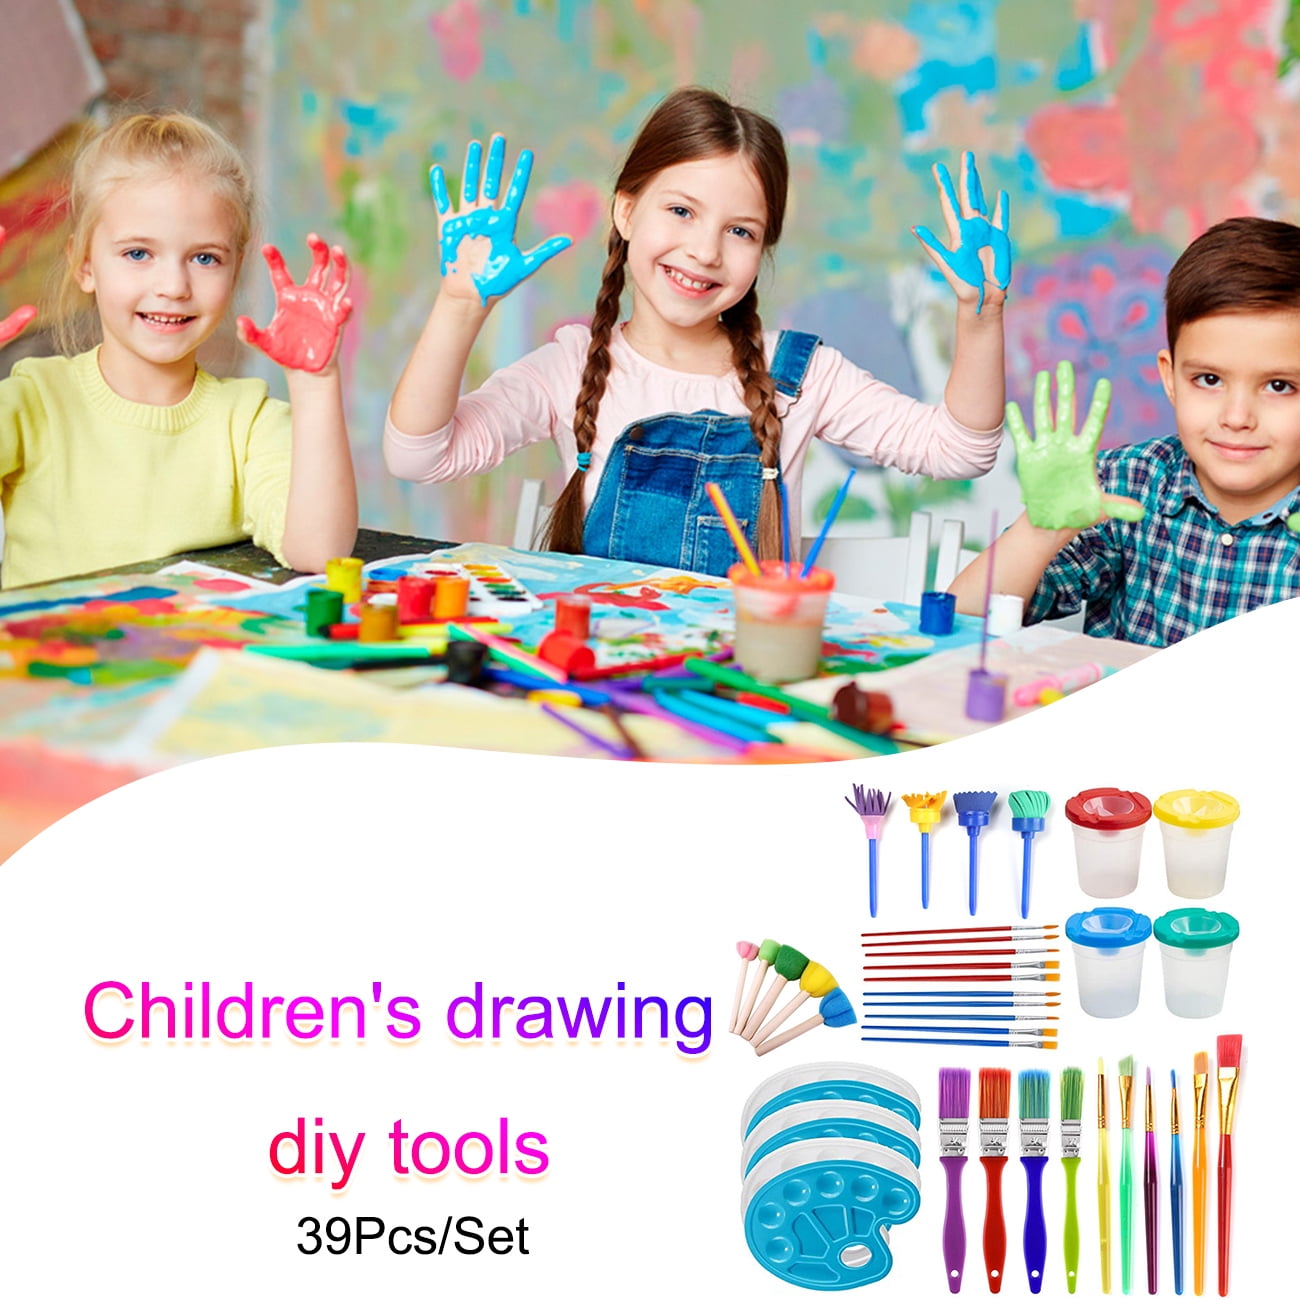 Foam Art Craft Drawing Tools Children Early DIY Learning Paint Sets 32pcs  Kids Paint Sponges Set With Waterproof Apron And